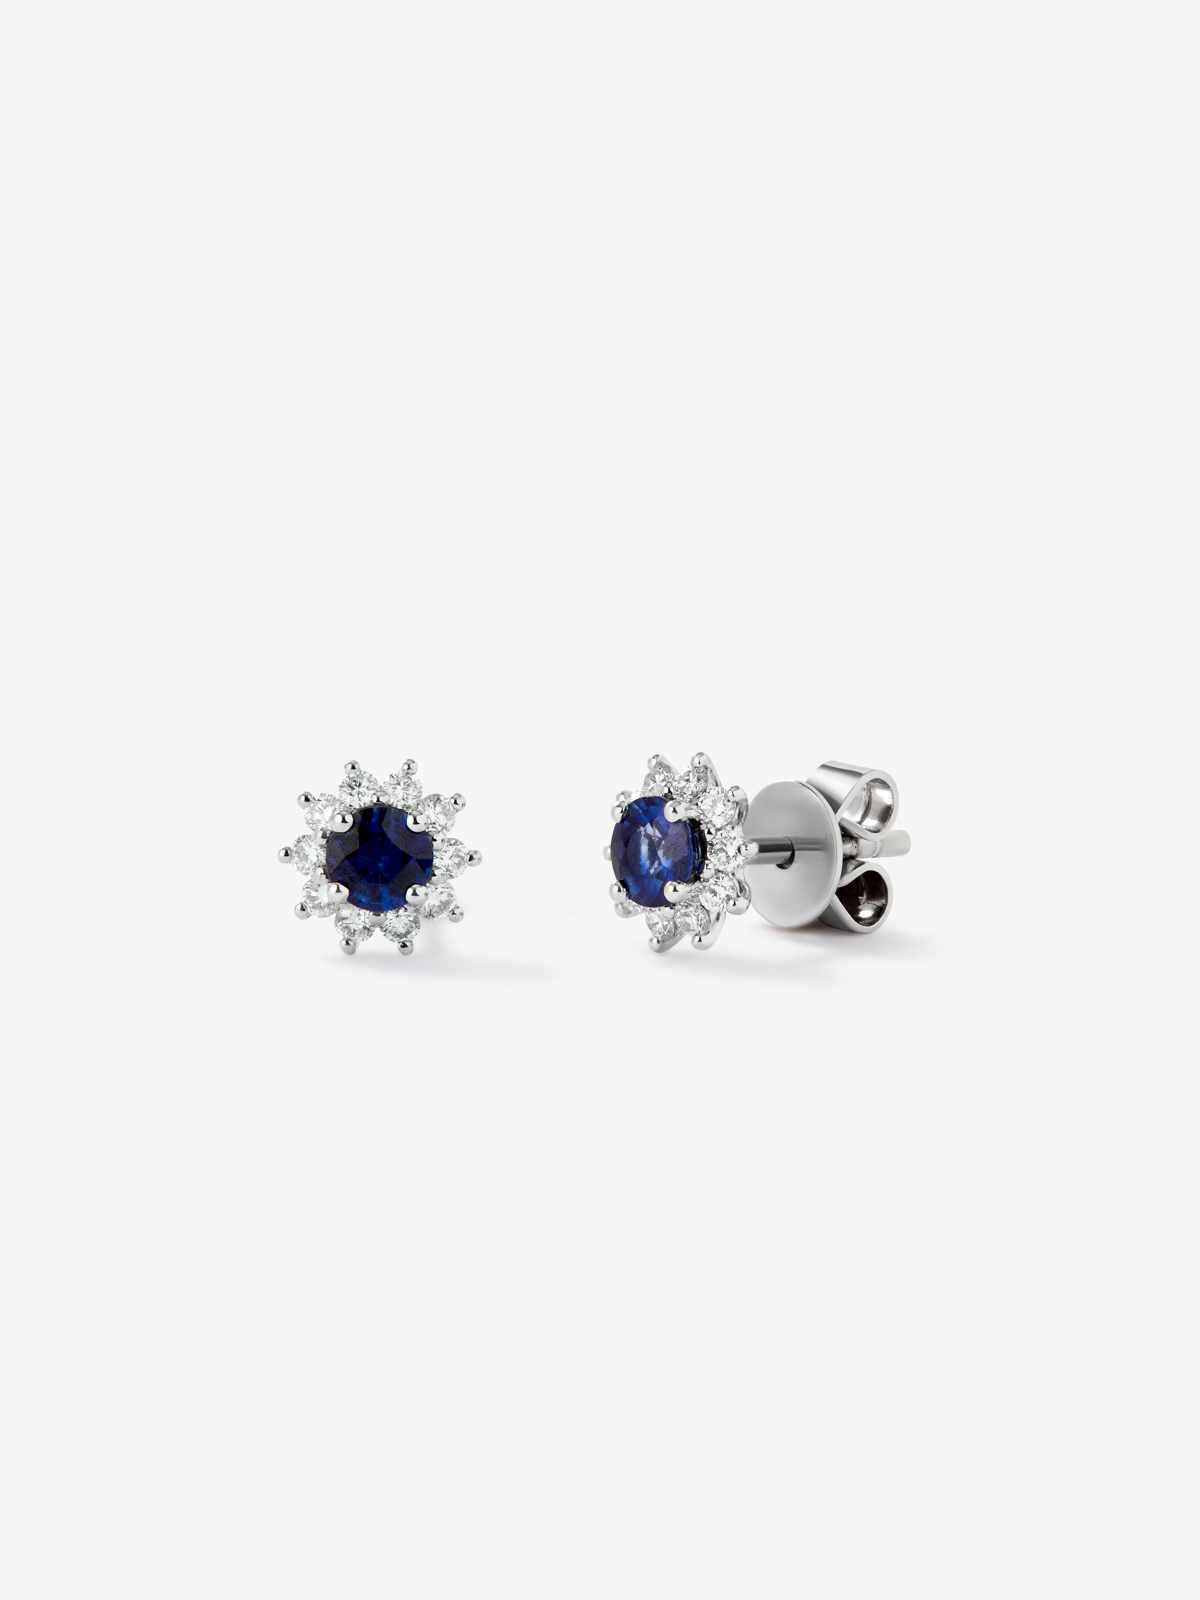 18kt white gold earrings with sapphires